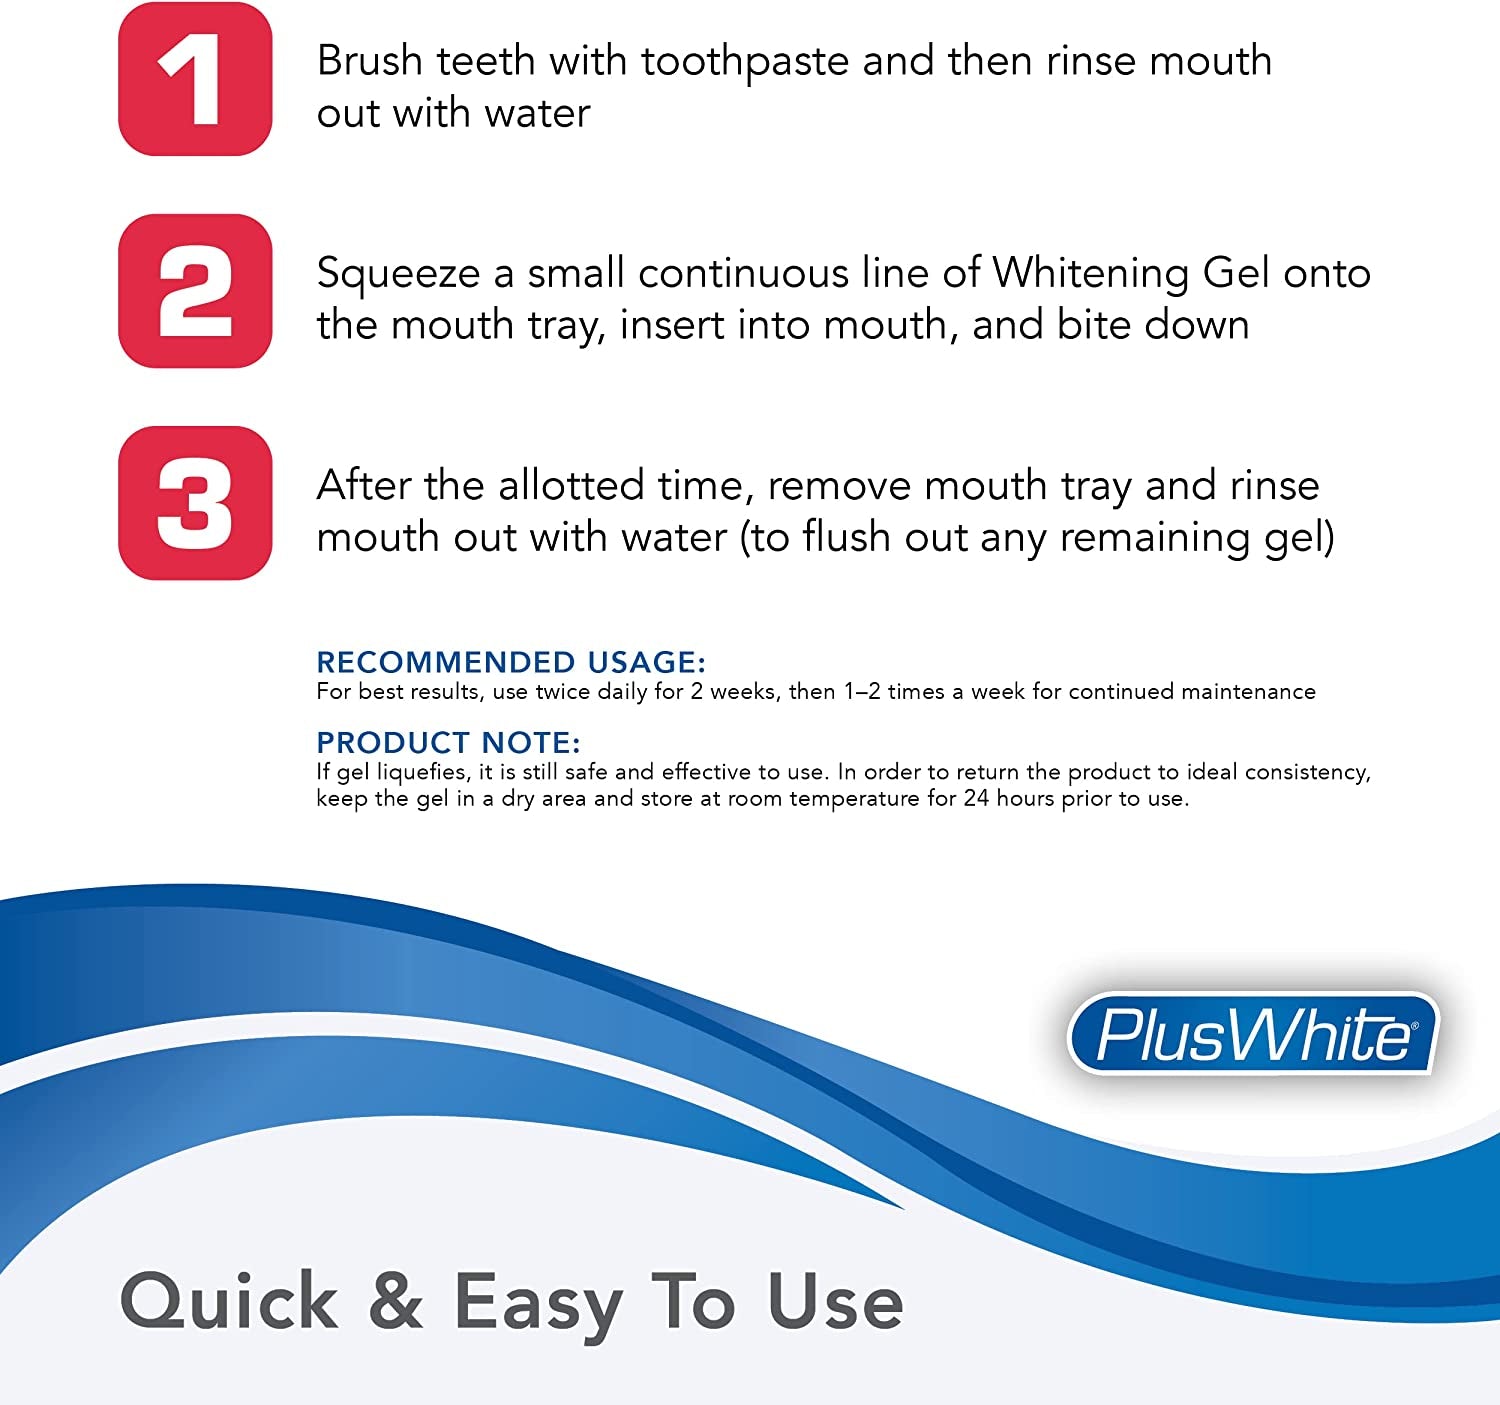 Plus White Whitening Kit - 5 Minute Speed Whitening Gel & Comfort Fit Mouth Tray - Professional Teeth Whitening Kit W/Dentist Approved Ingredient for Tooth Whitening (2 Oz)